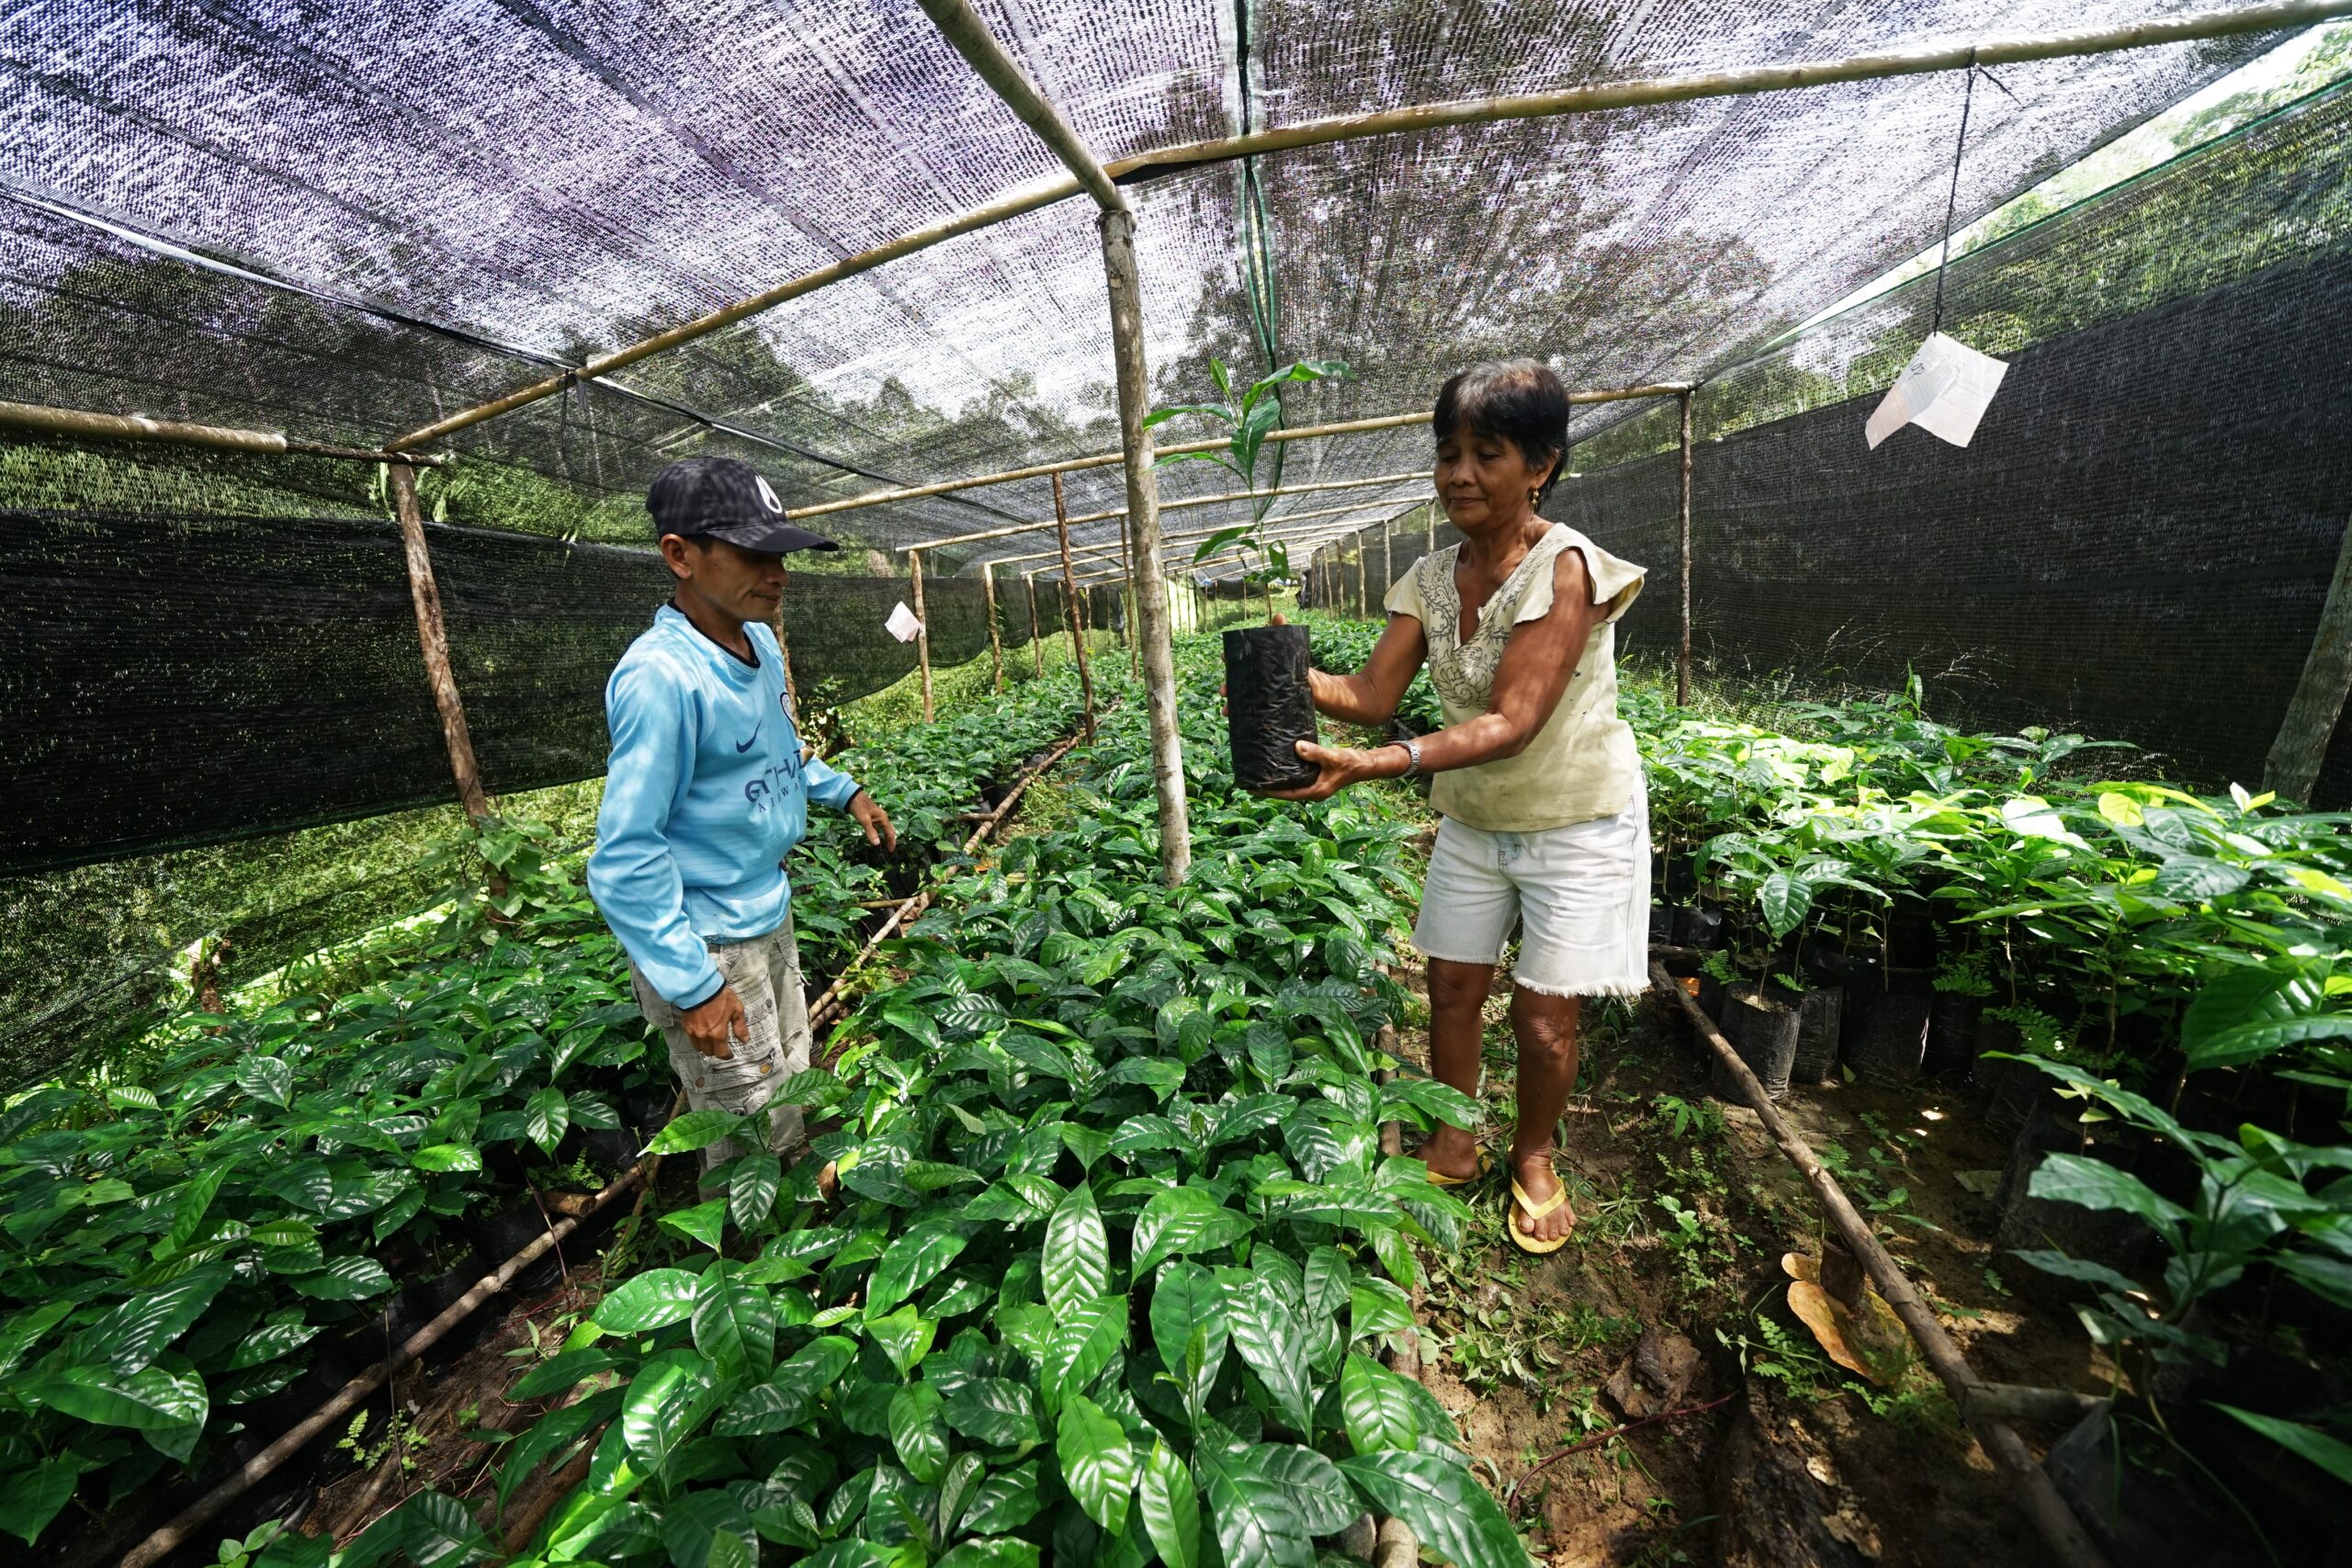 A man and woman in a greenhouse planting trees